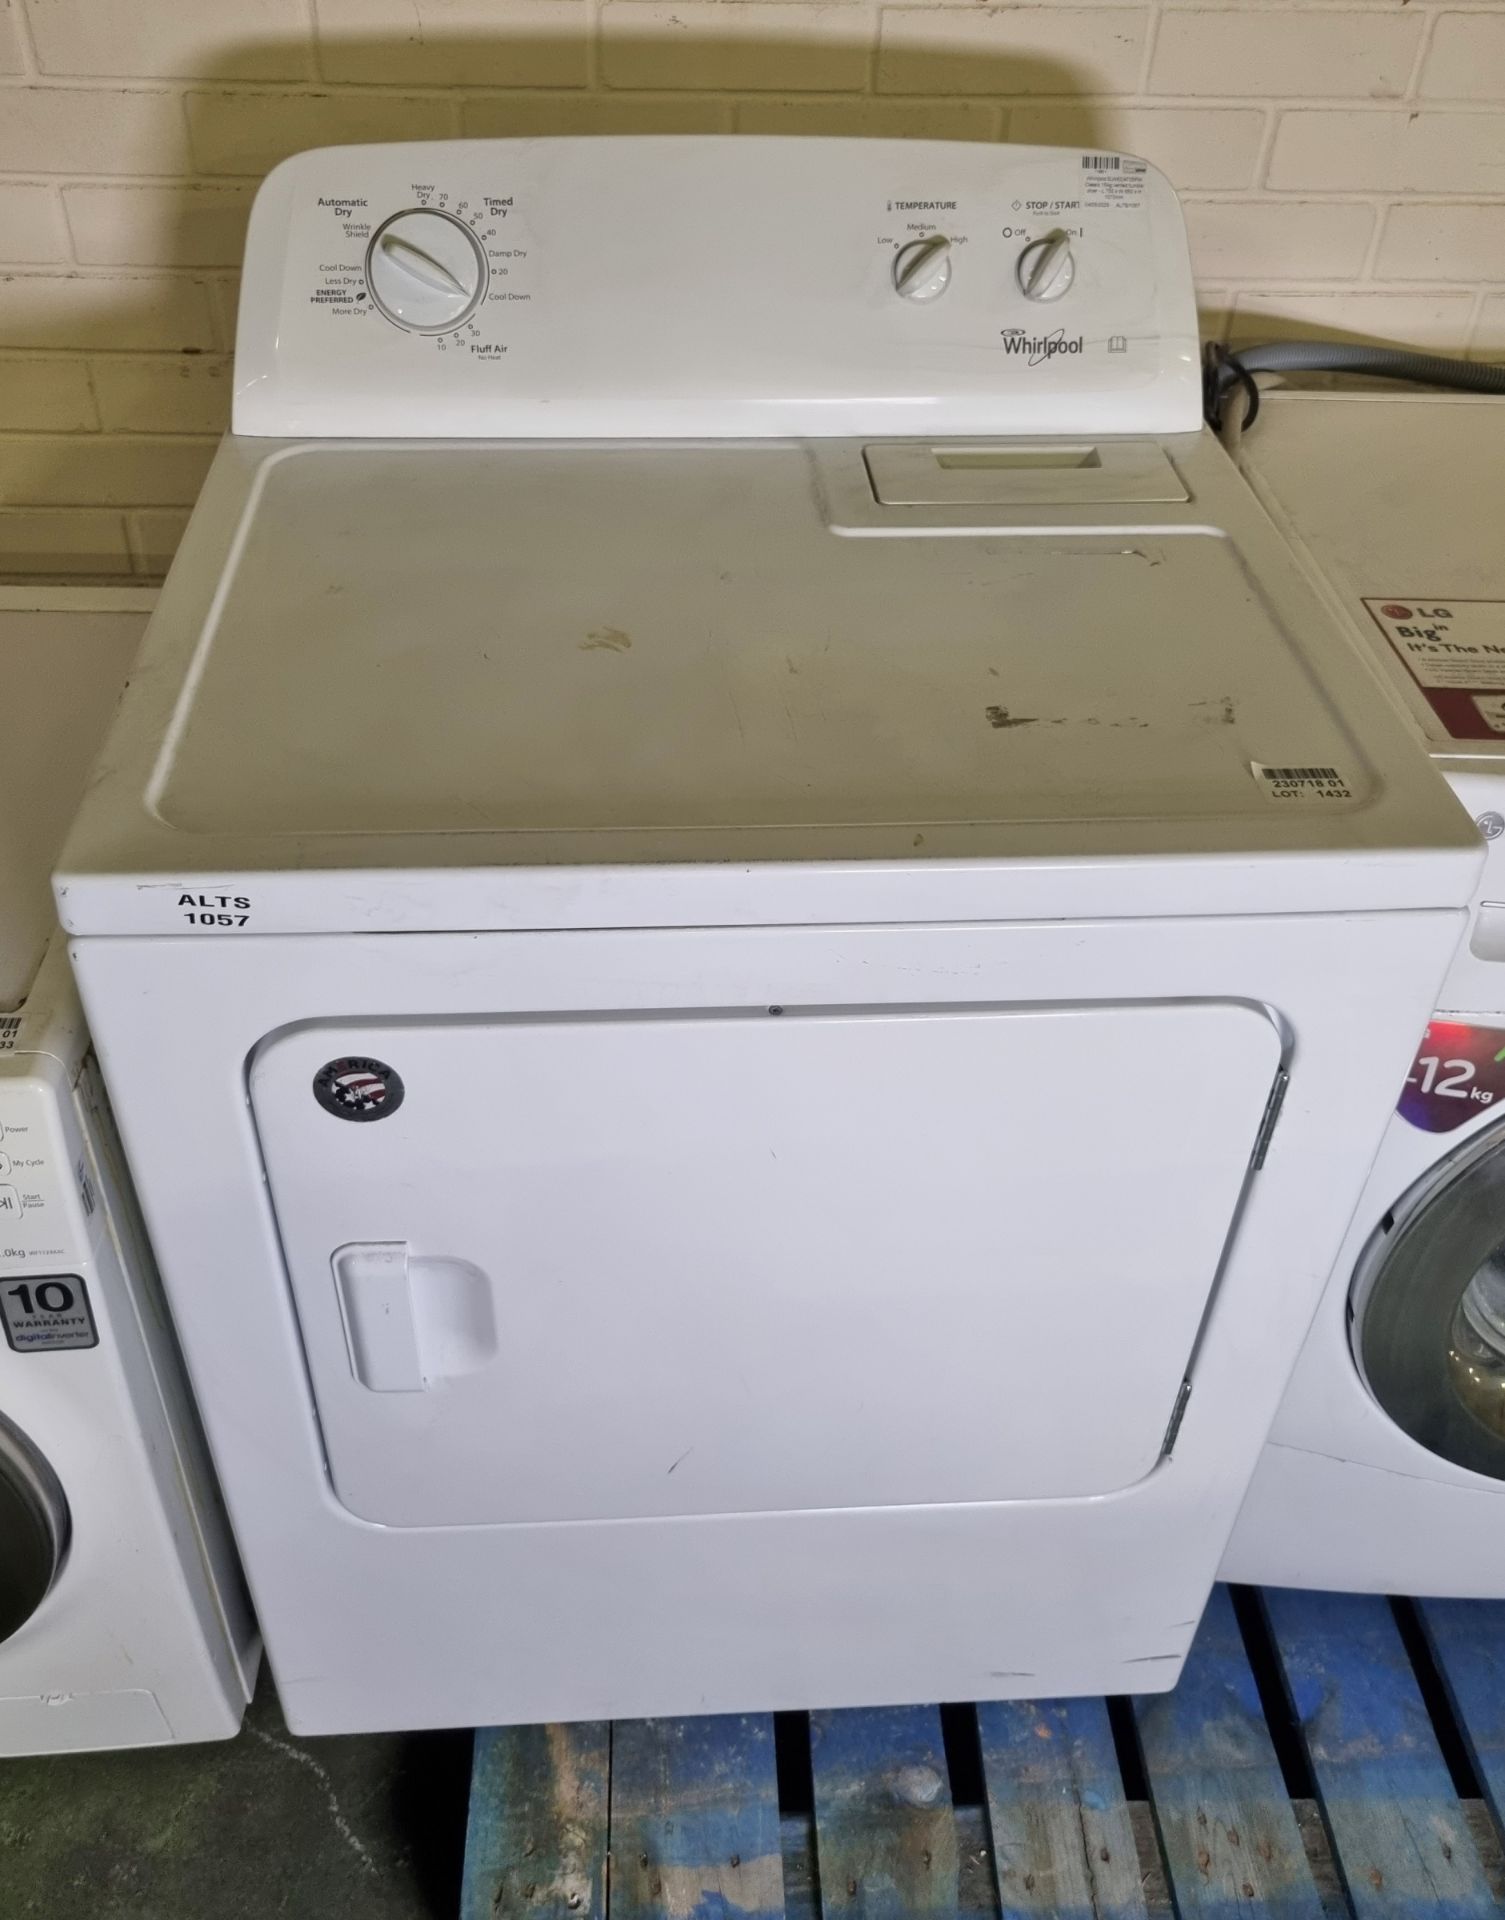 Whirlpool 3LWED4705FW Classic 15kg vented tumble dryer - L 750 x W 650 x H 1070mm - Image 2 of 5